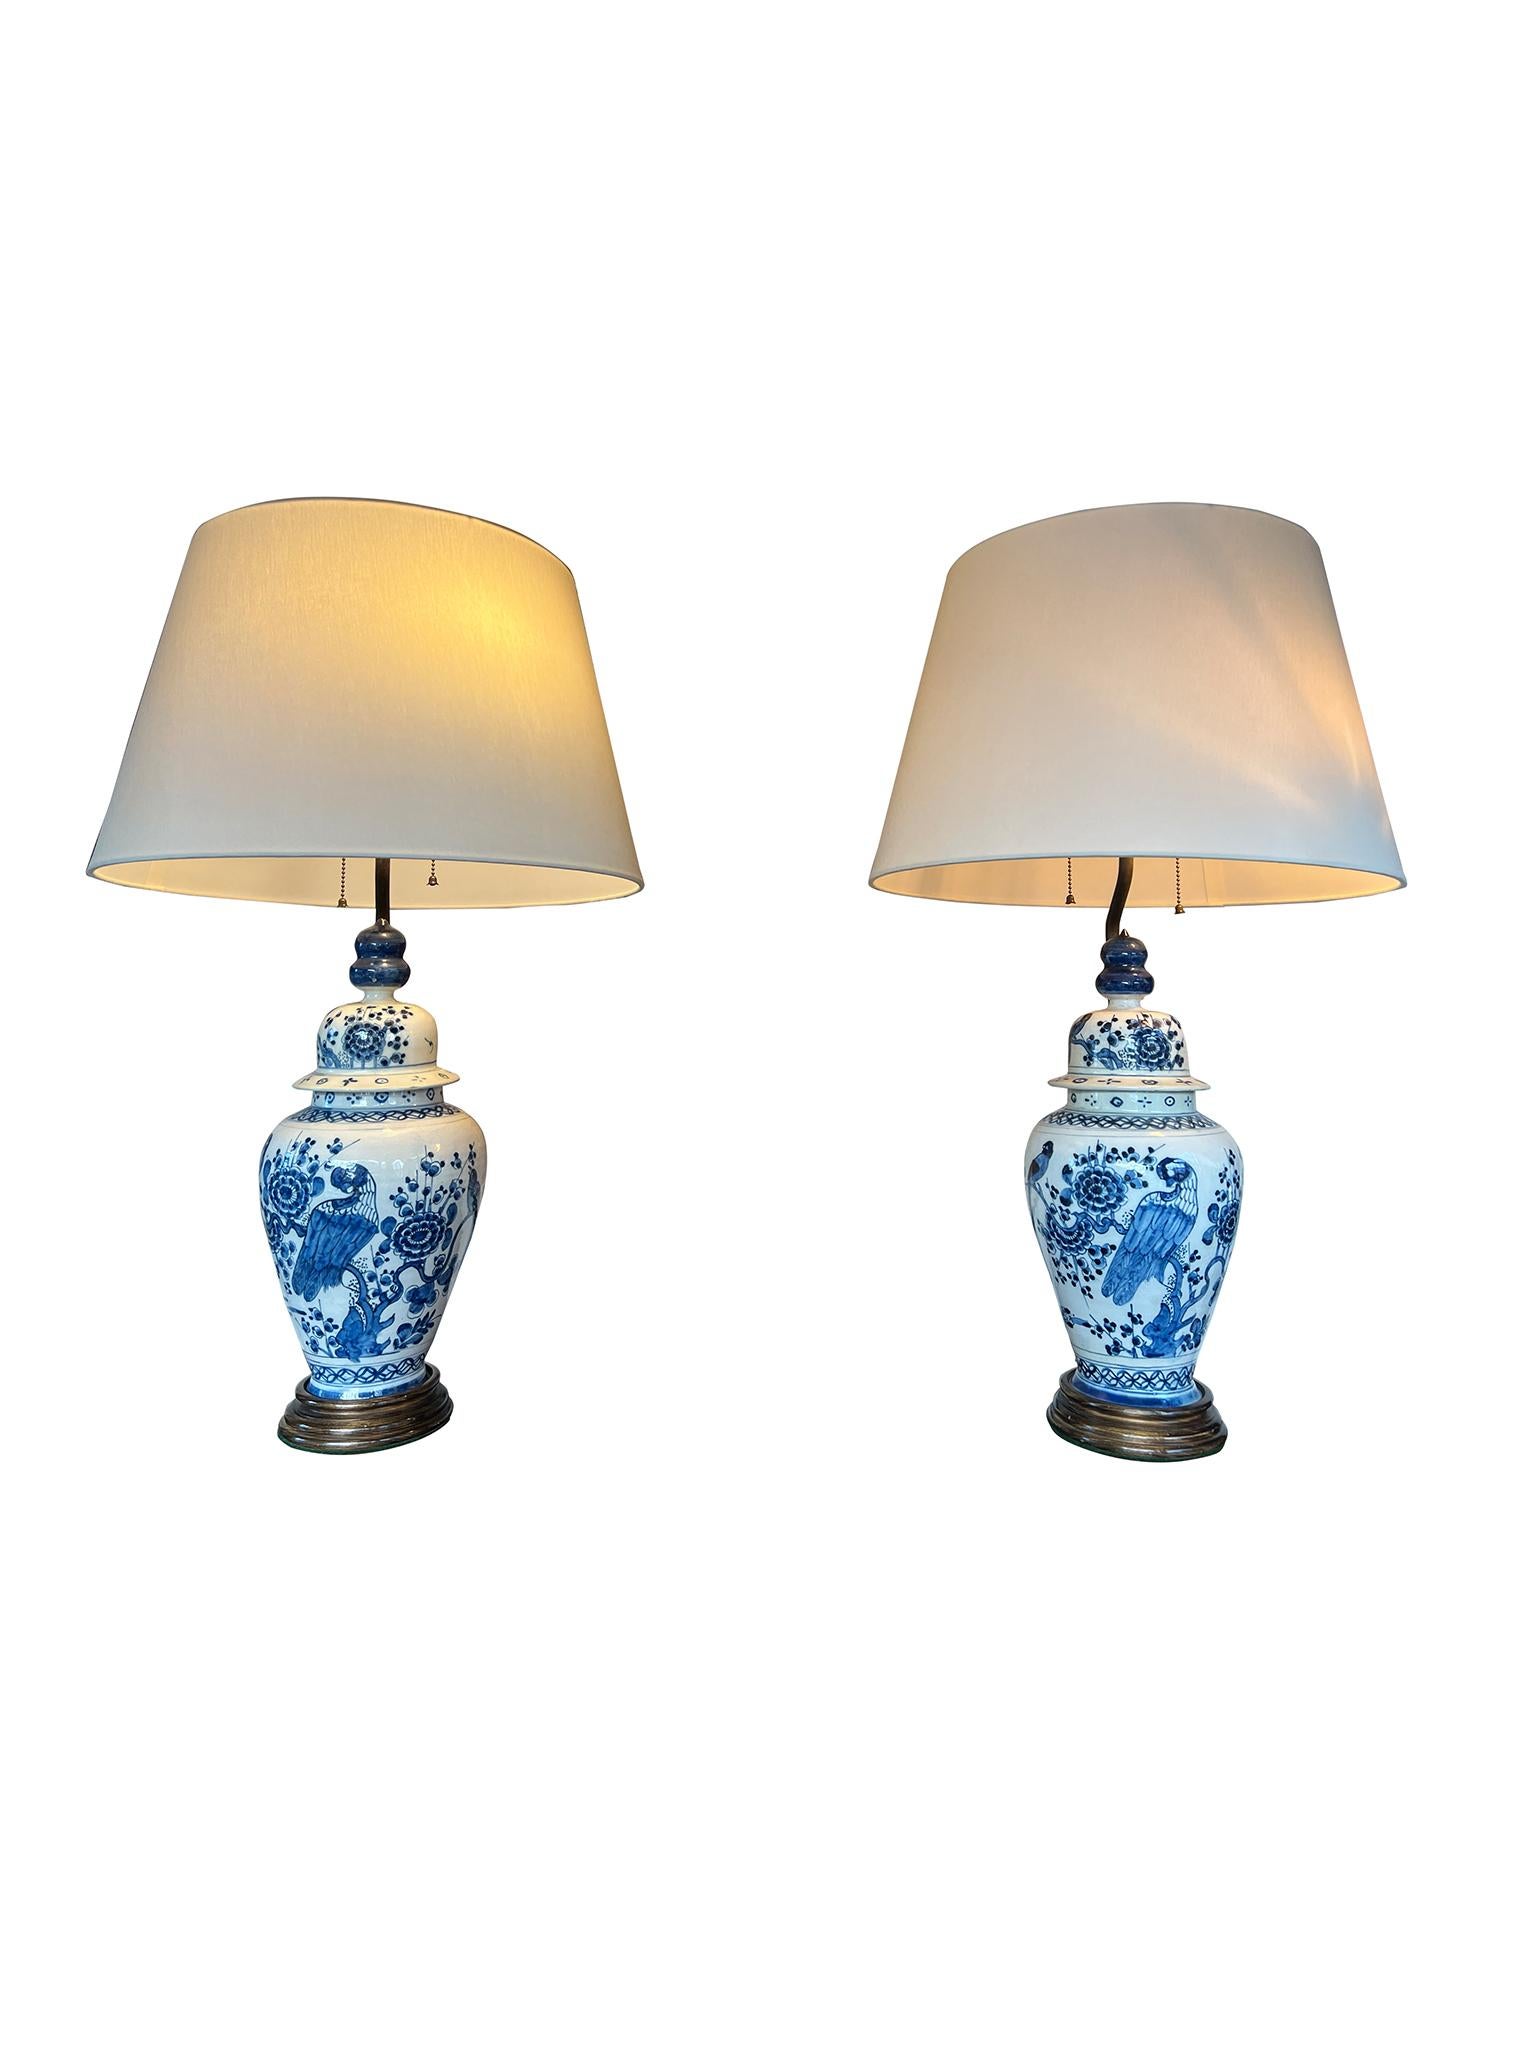 Charming pair of Delft Porcelain Table Lamps, in the style of Chinese Ginger Jar or Lidded Urn lamps. The lamps are decorated with a painting of a bird perched on a tree, surrounded by floral elements. The lamps have been fitted with new canvas